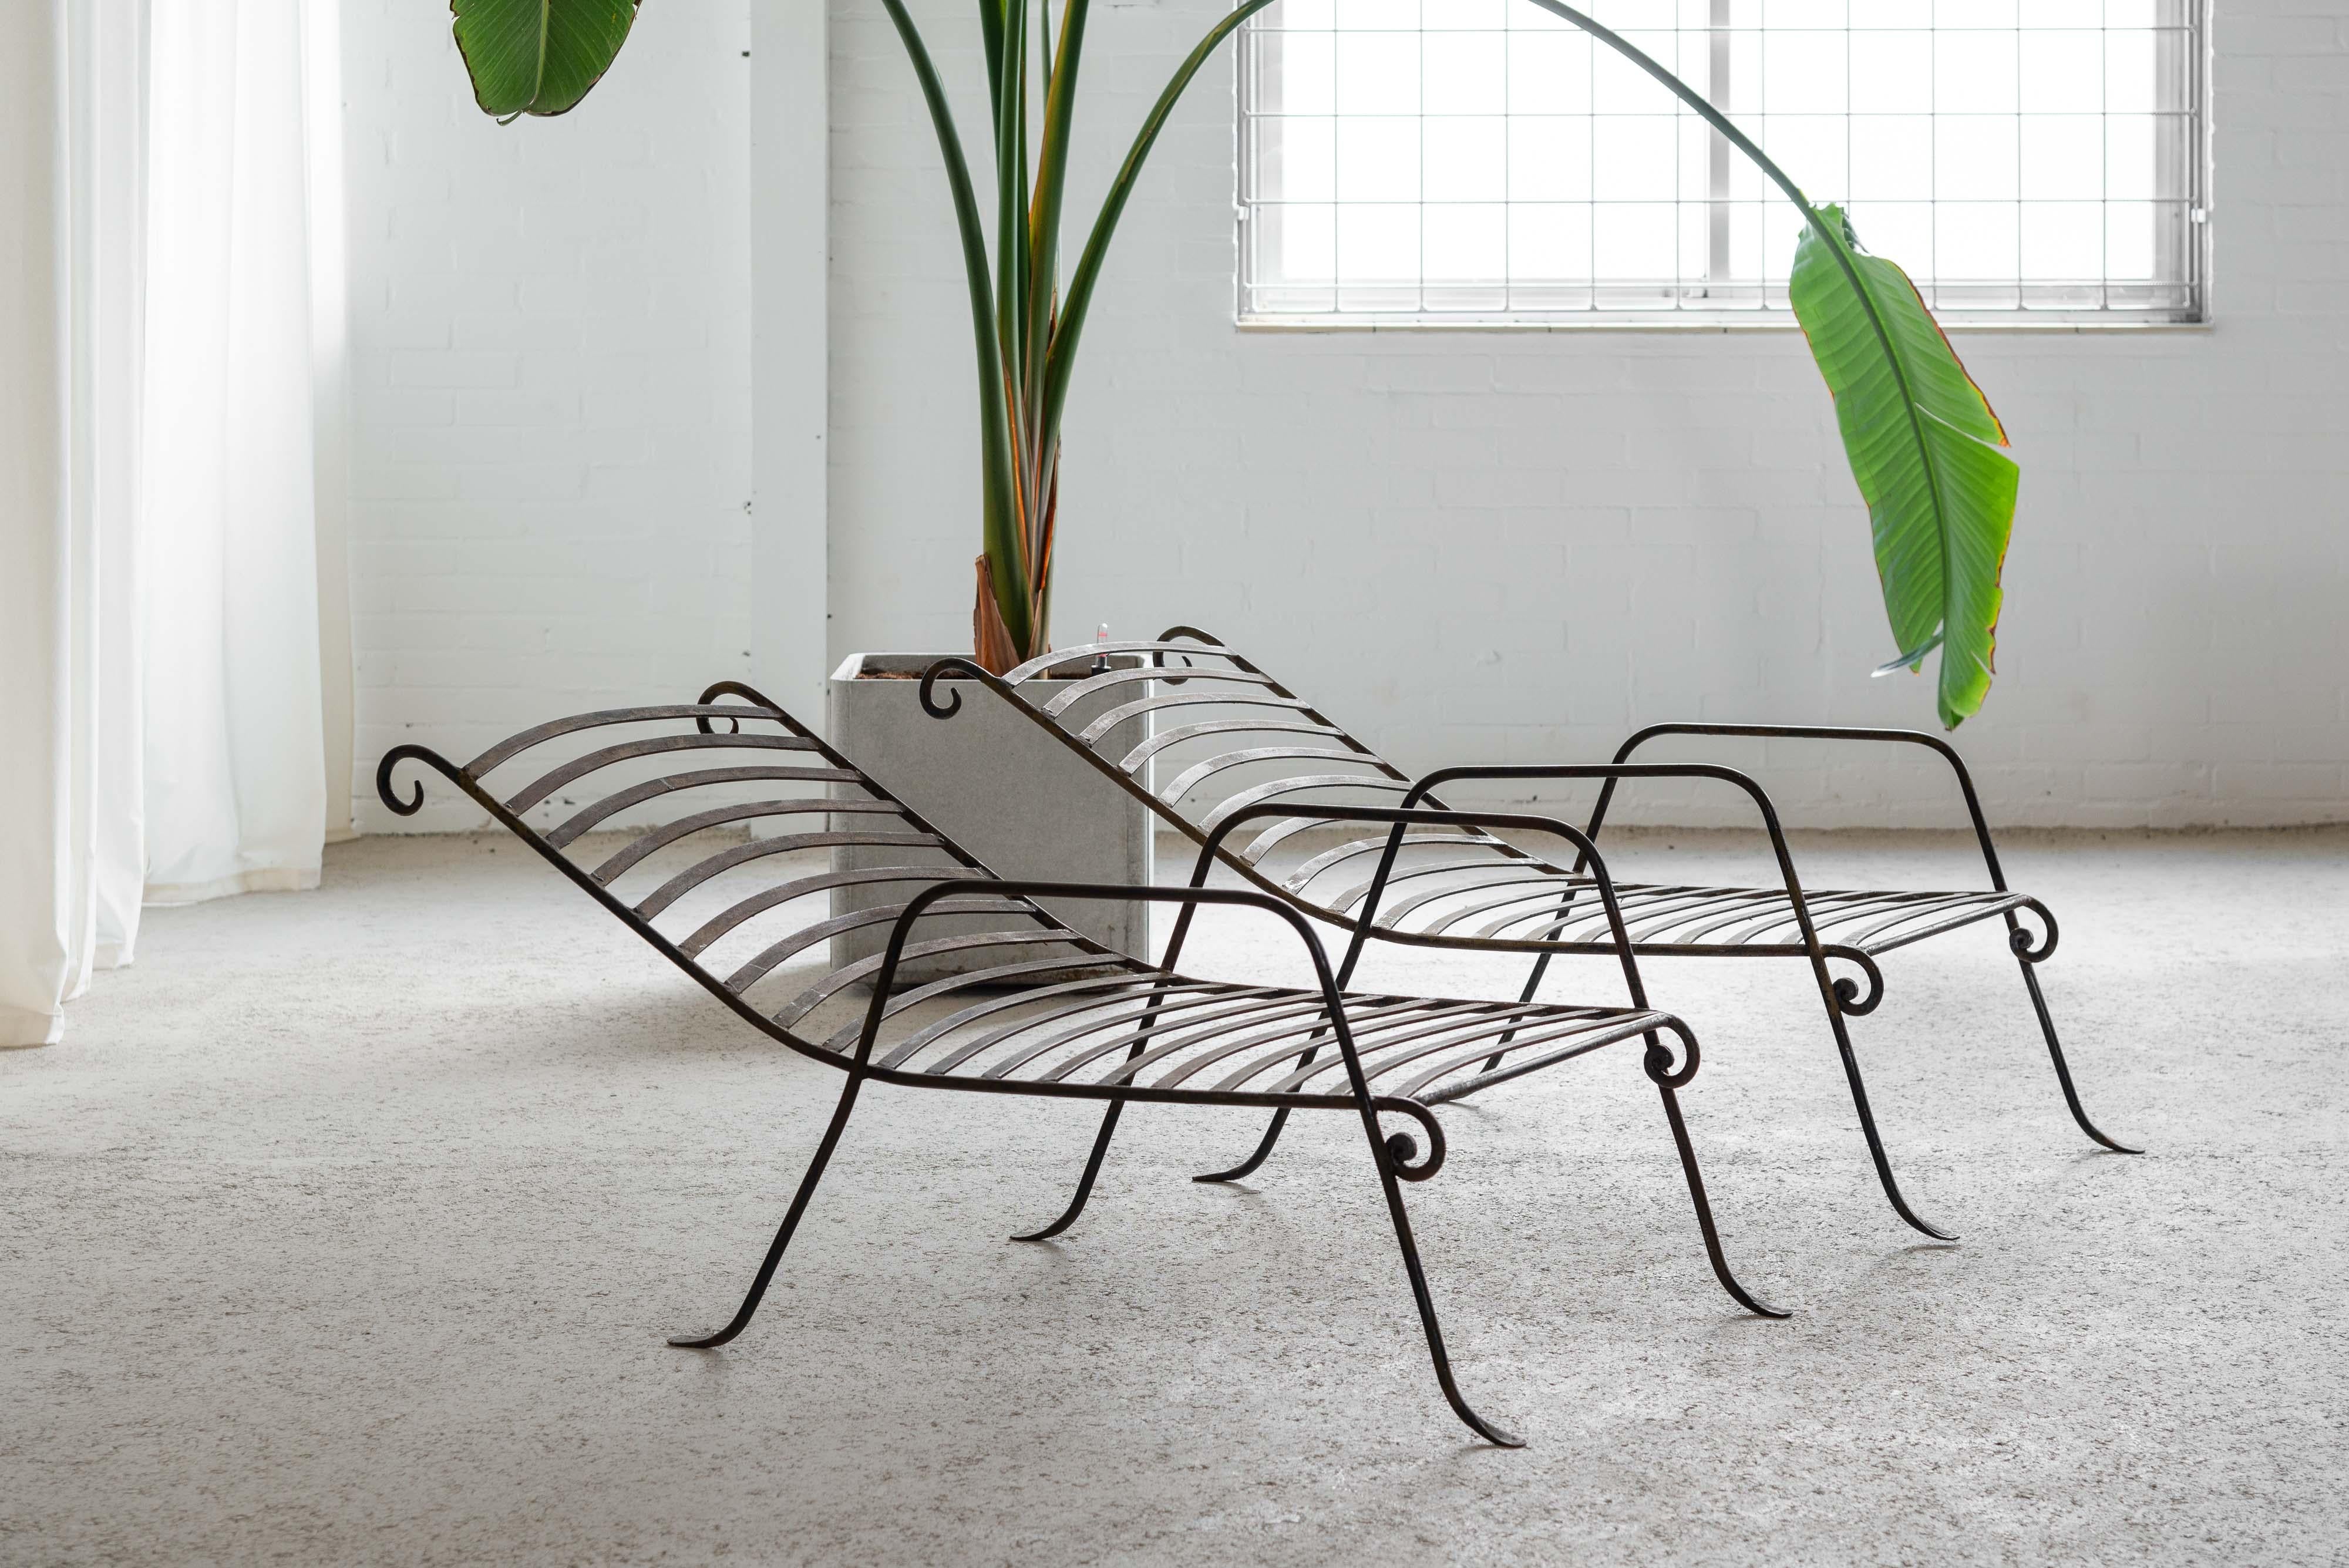 Incredible wrought iron garden lounge chairs made in France 1940. They look like beautiful sculptures. You might even think about famous designers like Rene Drouet, Jean Royere, and Raymond Subes, who worked for Maison Dominique. That's how good